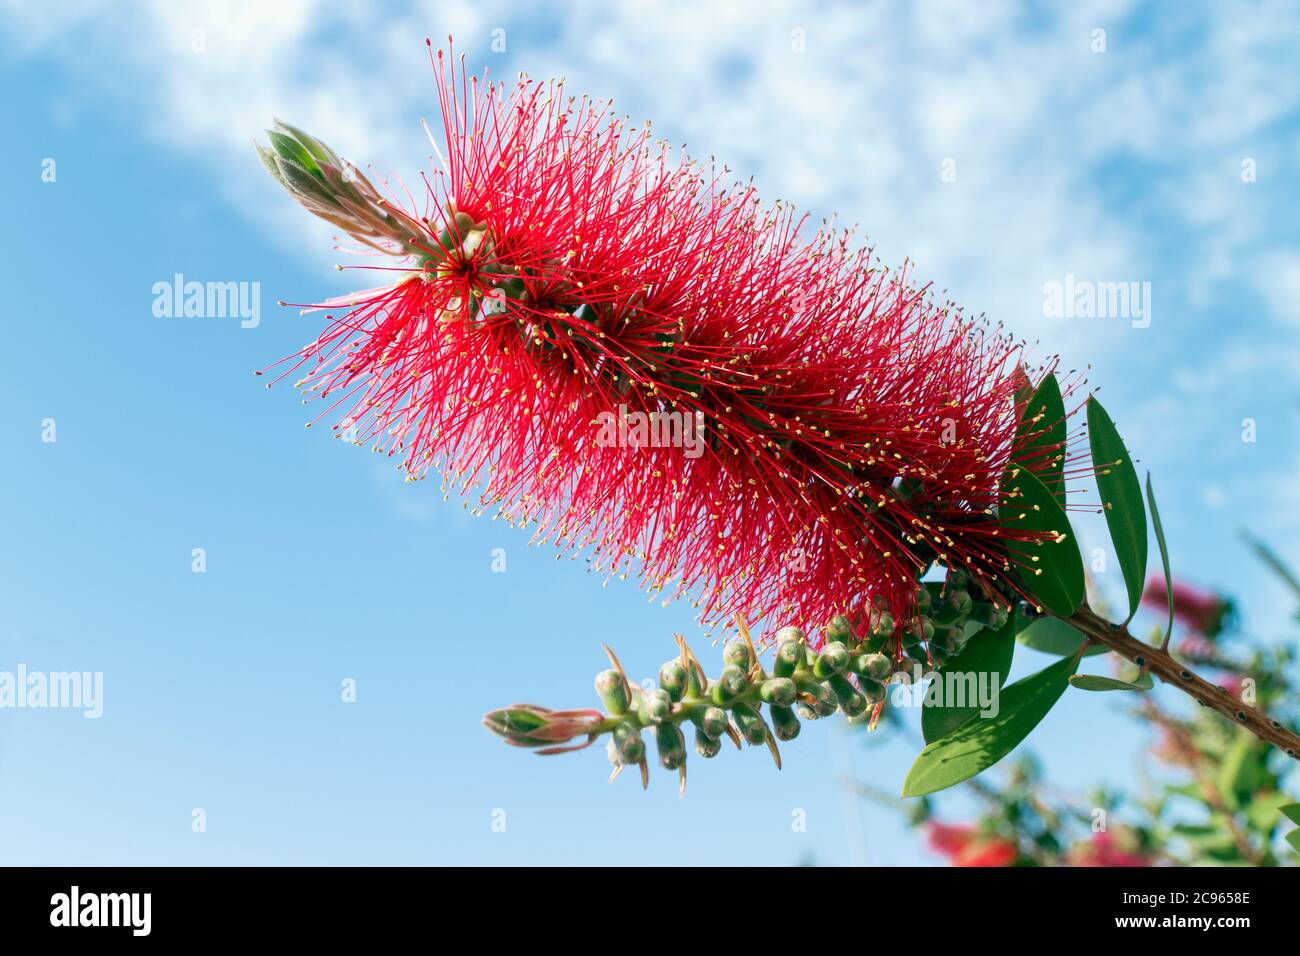 Callistemon, a genus of shrubs in the family Myrtaceae.  Often called Bottlebrush because of its flower's shape which resembles a bottle brush. Stock Photo